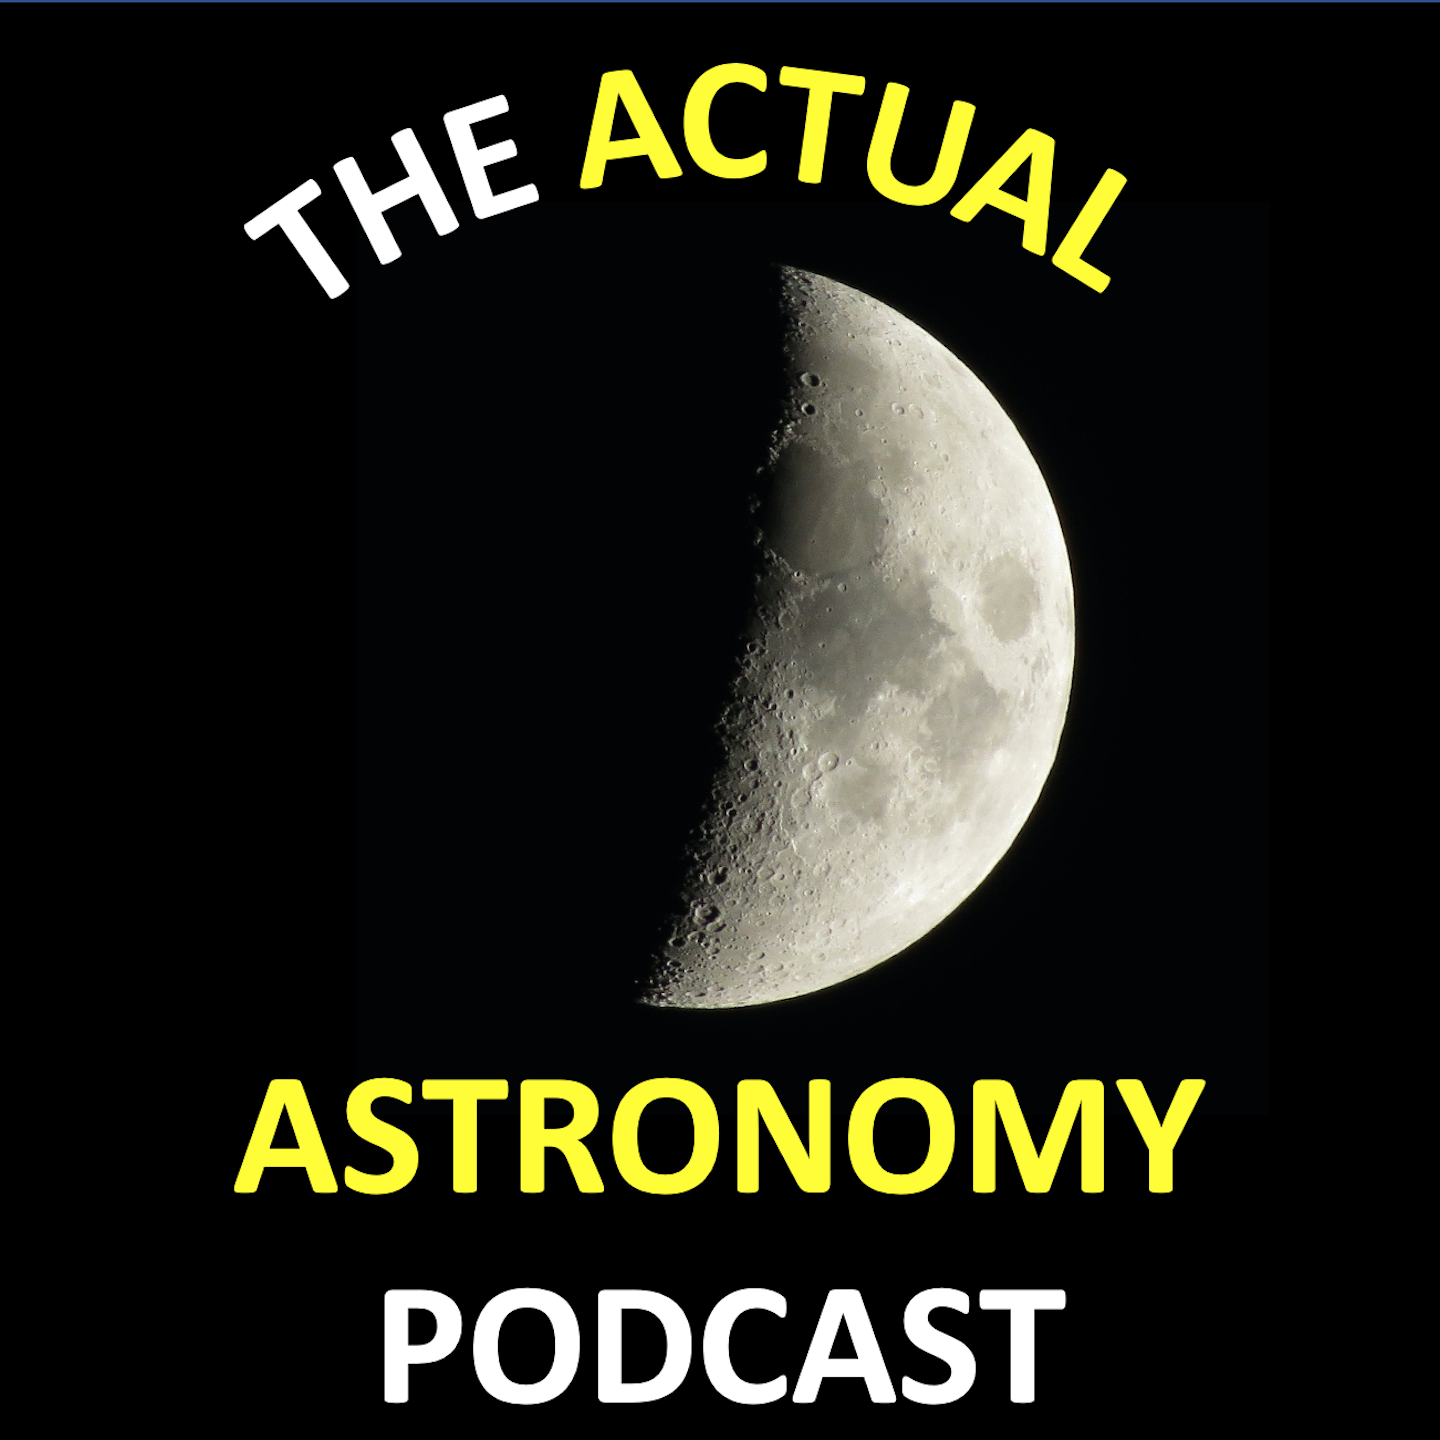 The Actual Astronomy Podcast Image